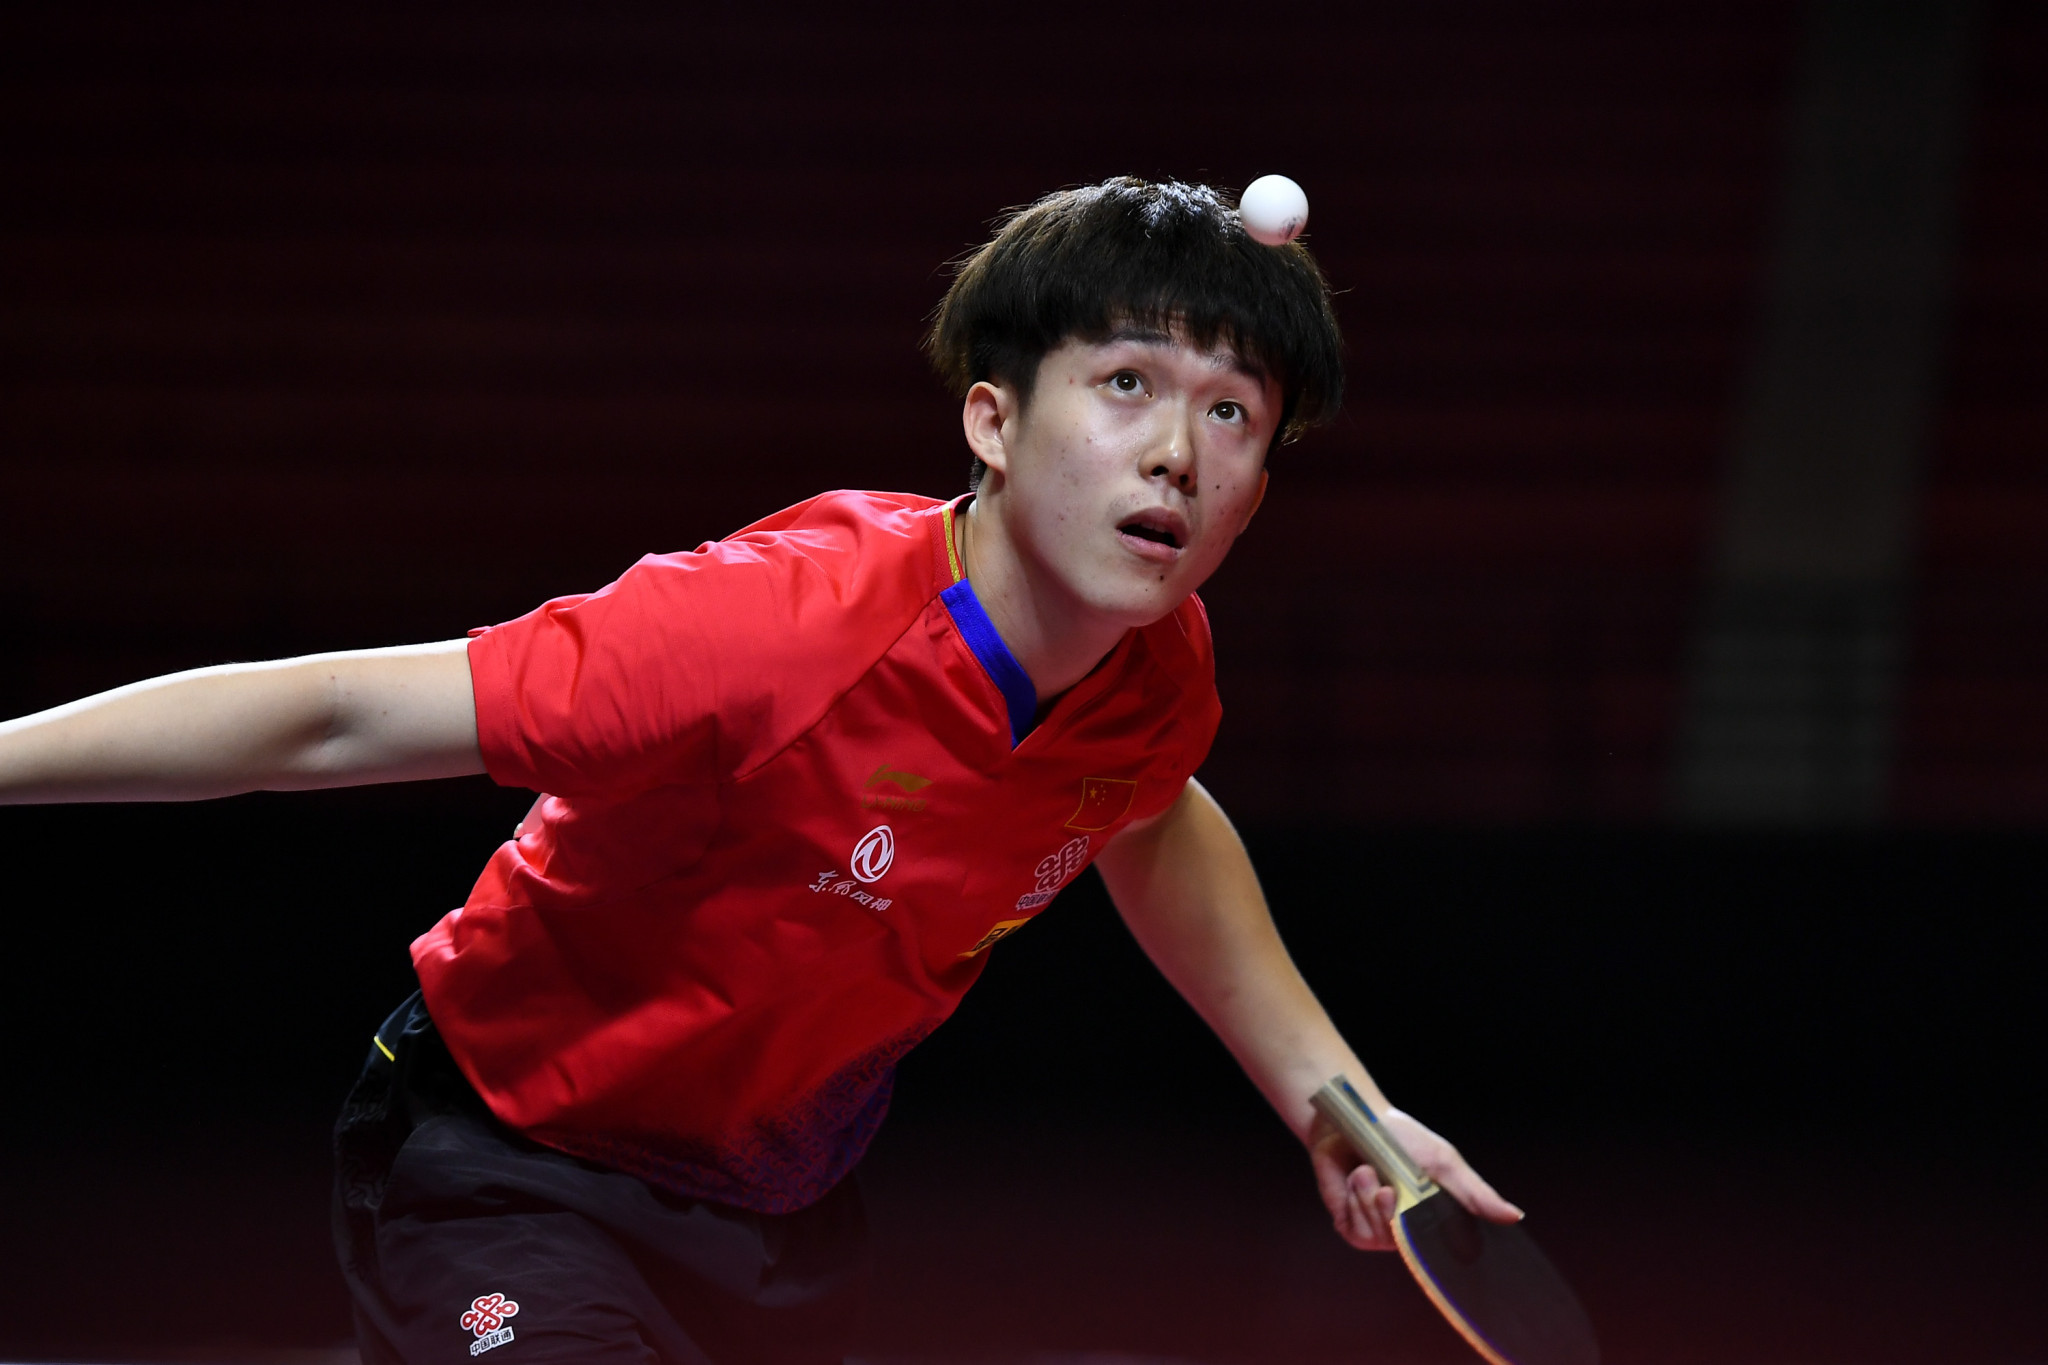 Wang Chuqin arrives in Bremen having clinched his maiden ITTF World Tour title at the Swedish Open ©Getty Images